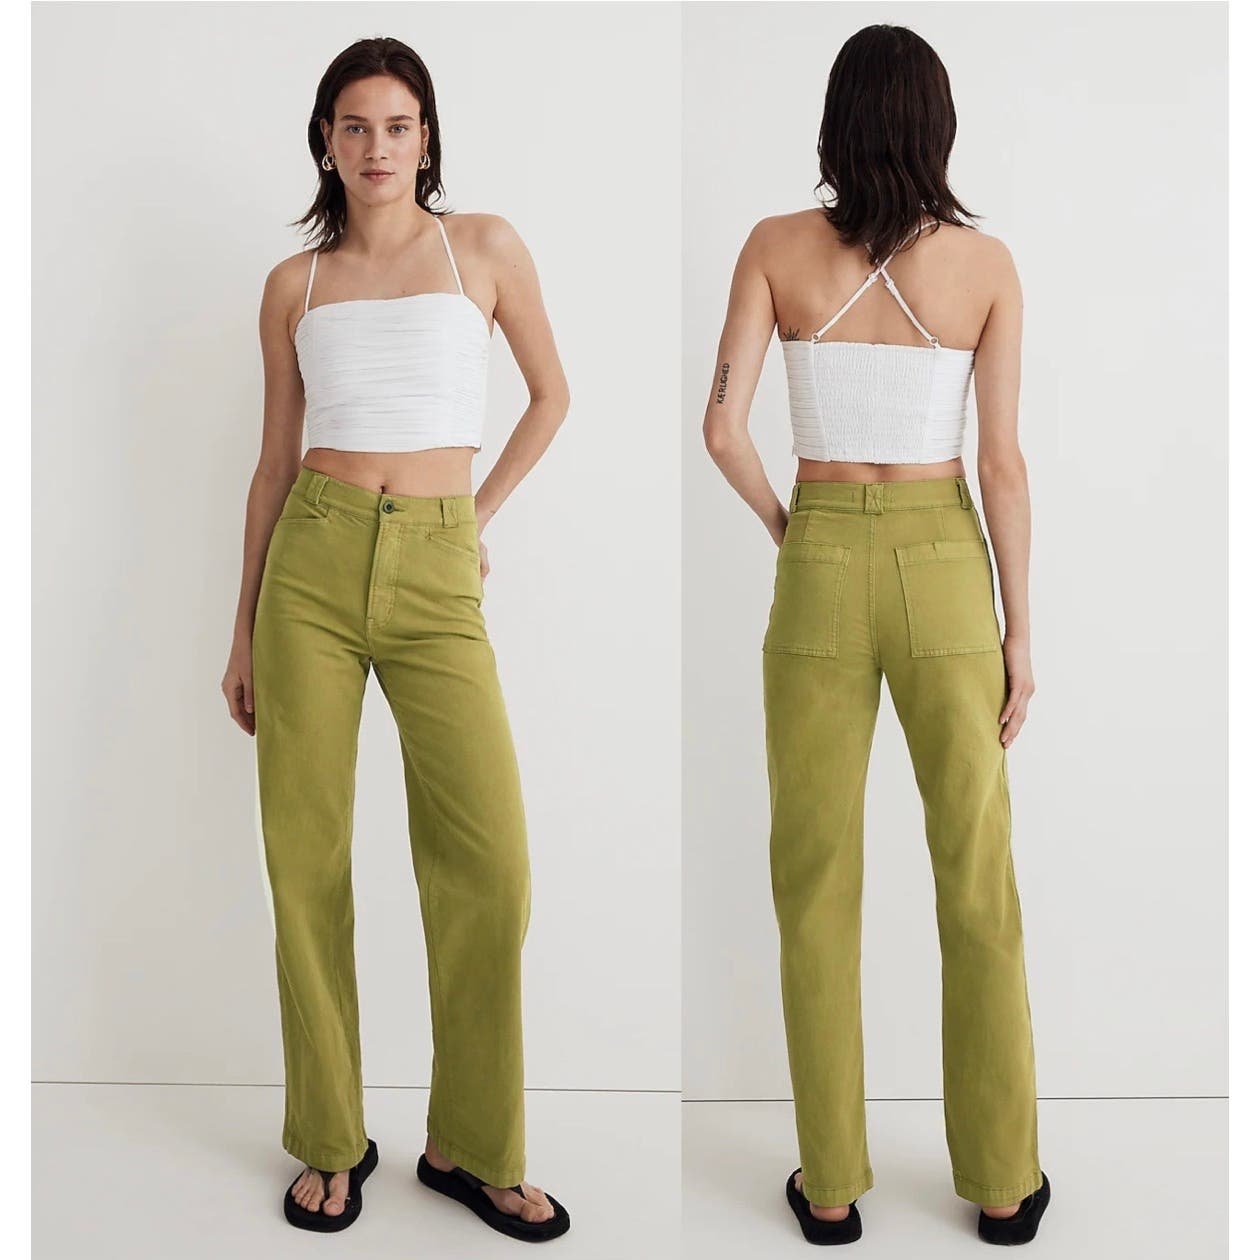 large selection NWT Madewell The Emmett High Rise Wide Leg Green Pants Womens Size 33 nvWxD3vlY Discount